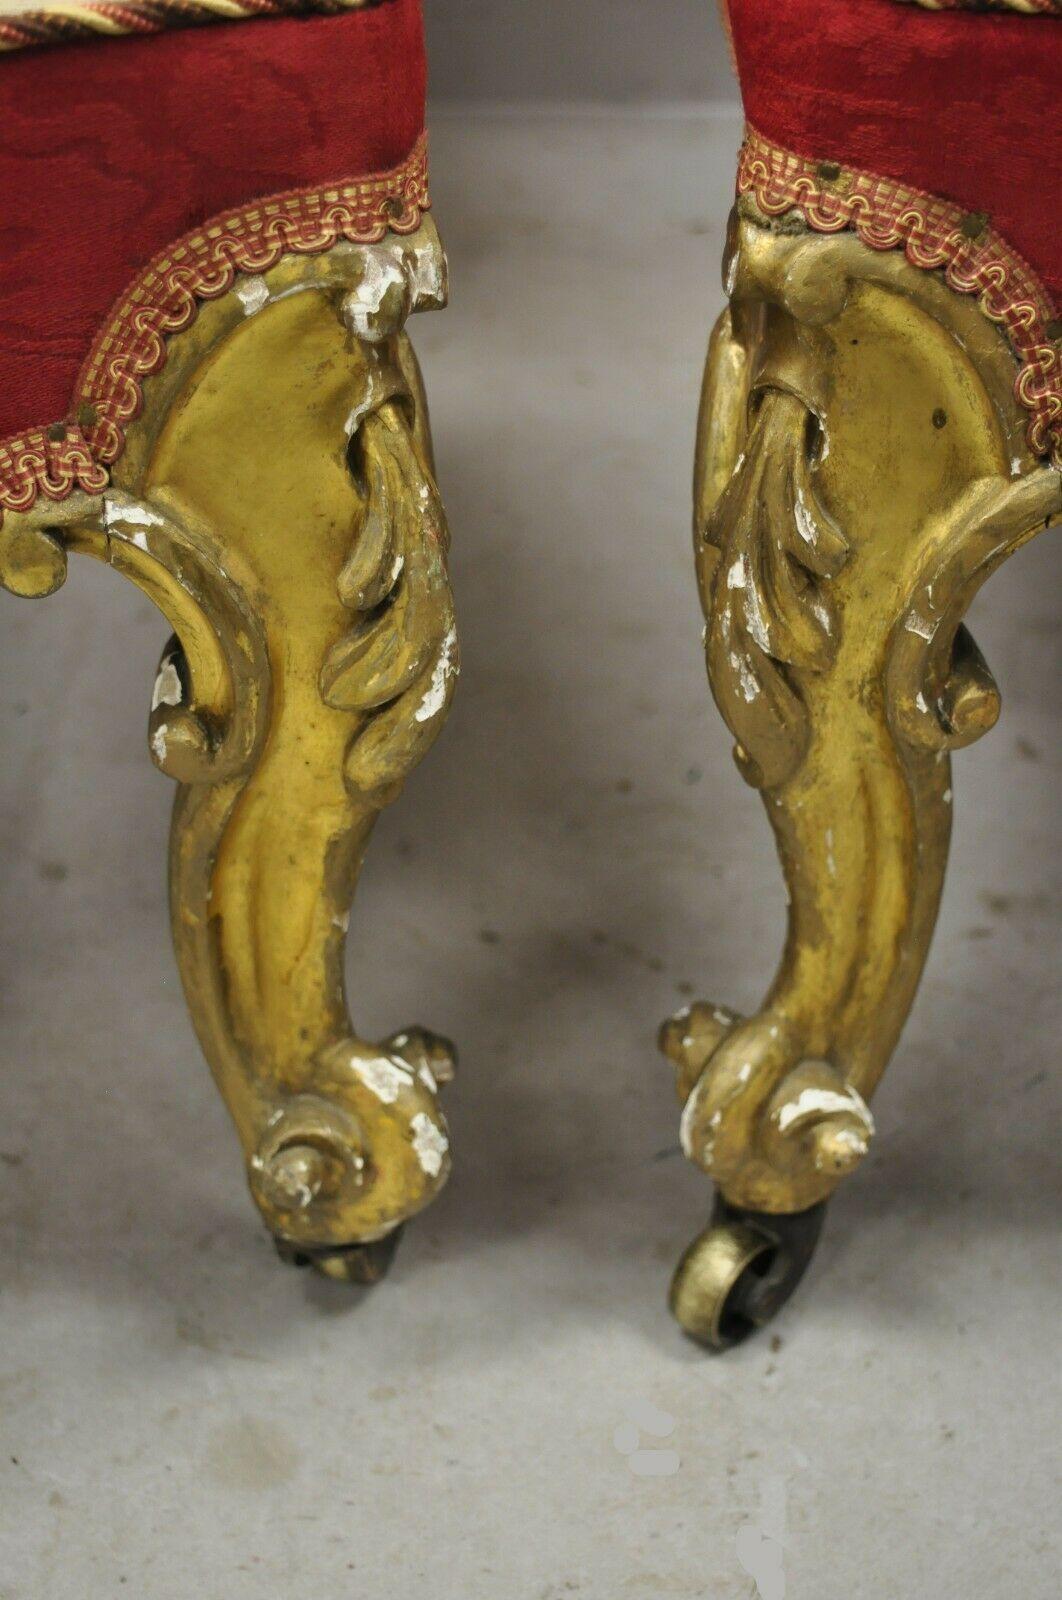 North American Antique French Victorian Gold Gilt Rococo Revival Slipper Parlor Chairs, a Pair For Sale